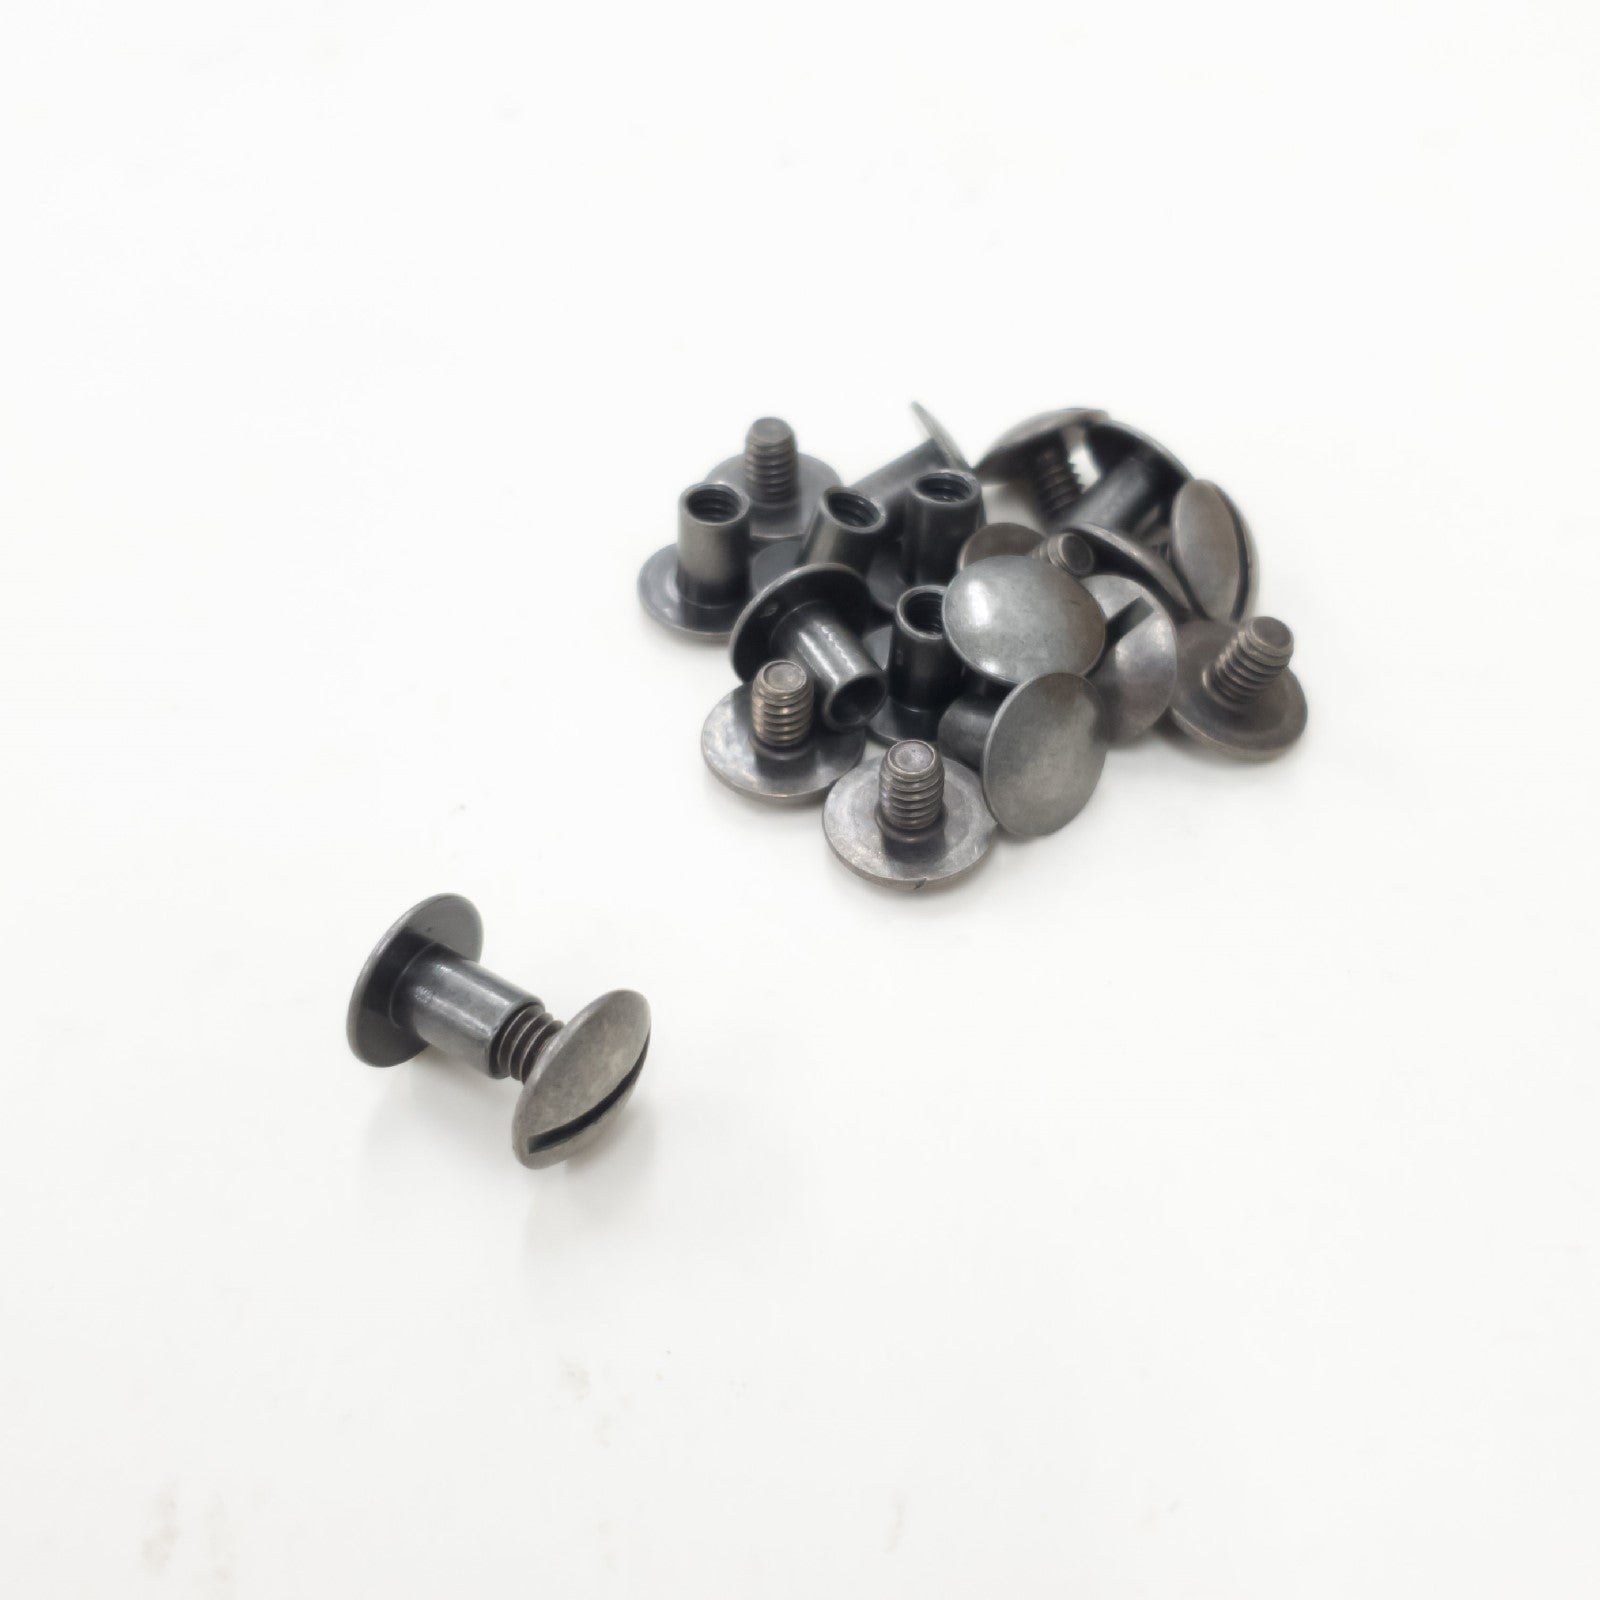 Chicago Screws, 6 mm/ 1/4", 10 Pack, Antique Nickel | The Leather Guy